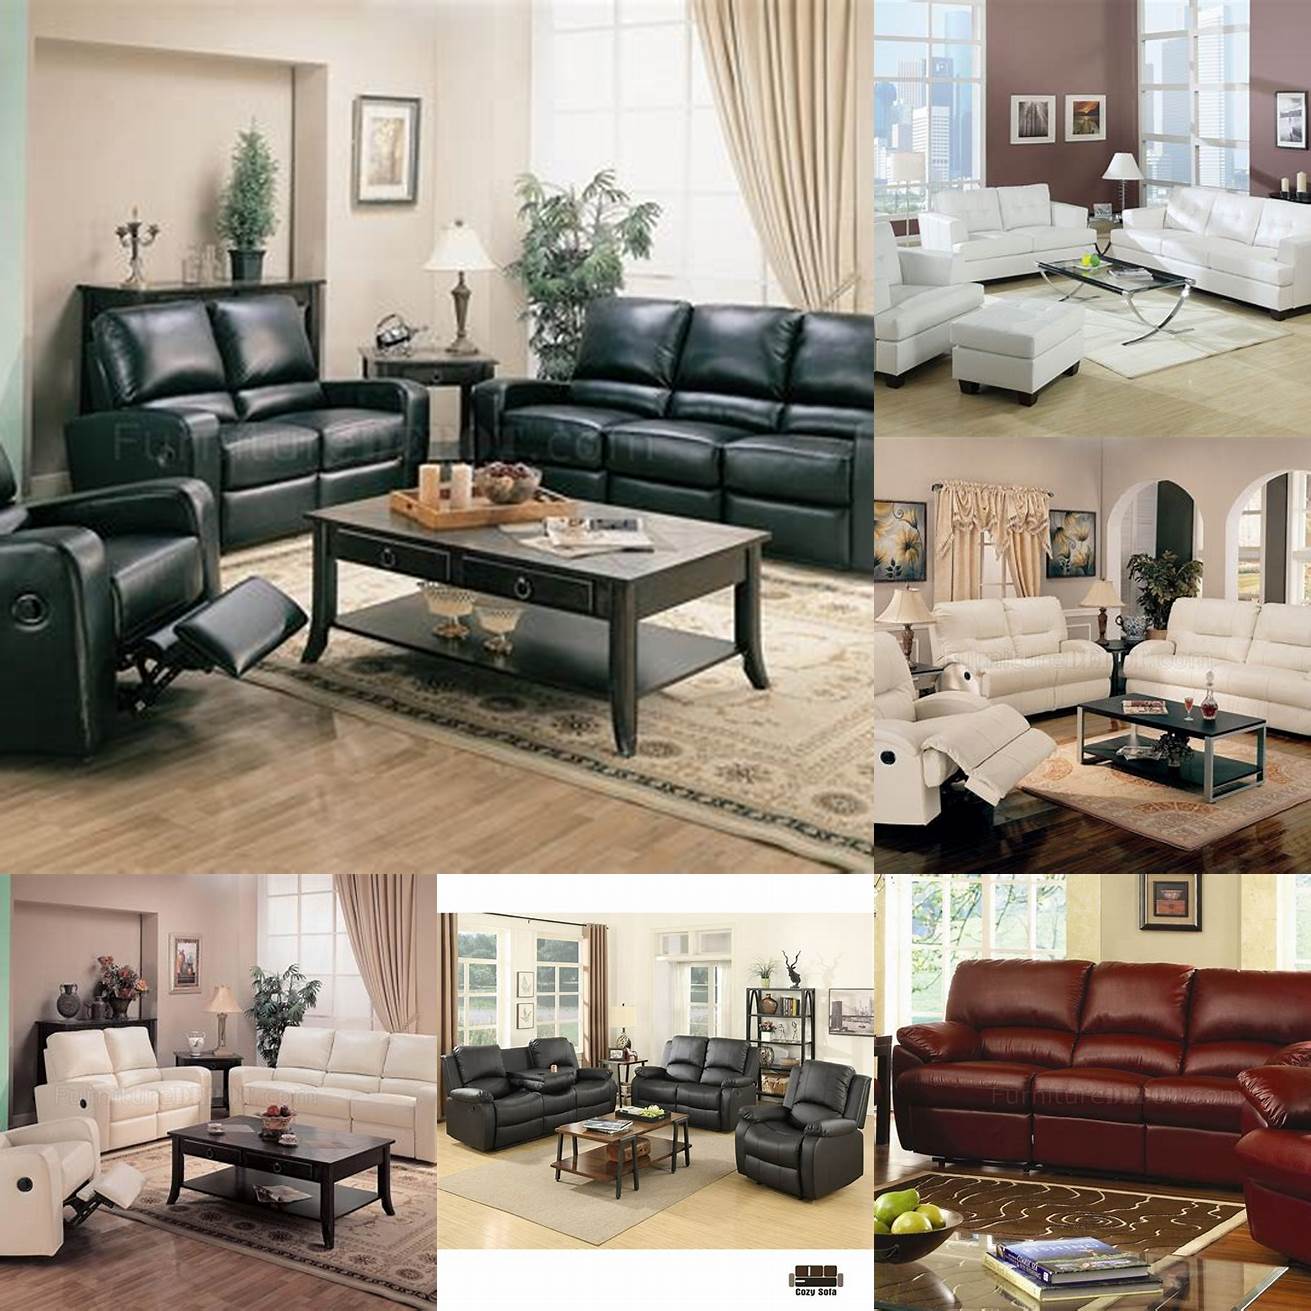 Image 1 A bonded leather sofa in a living room setting